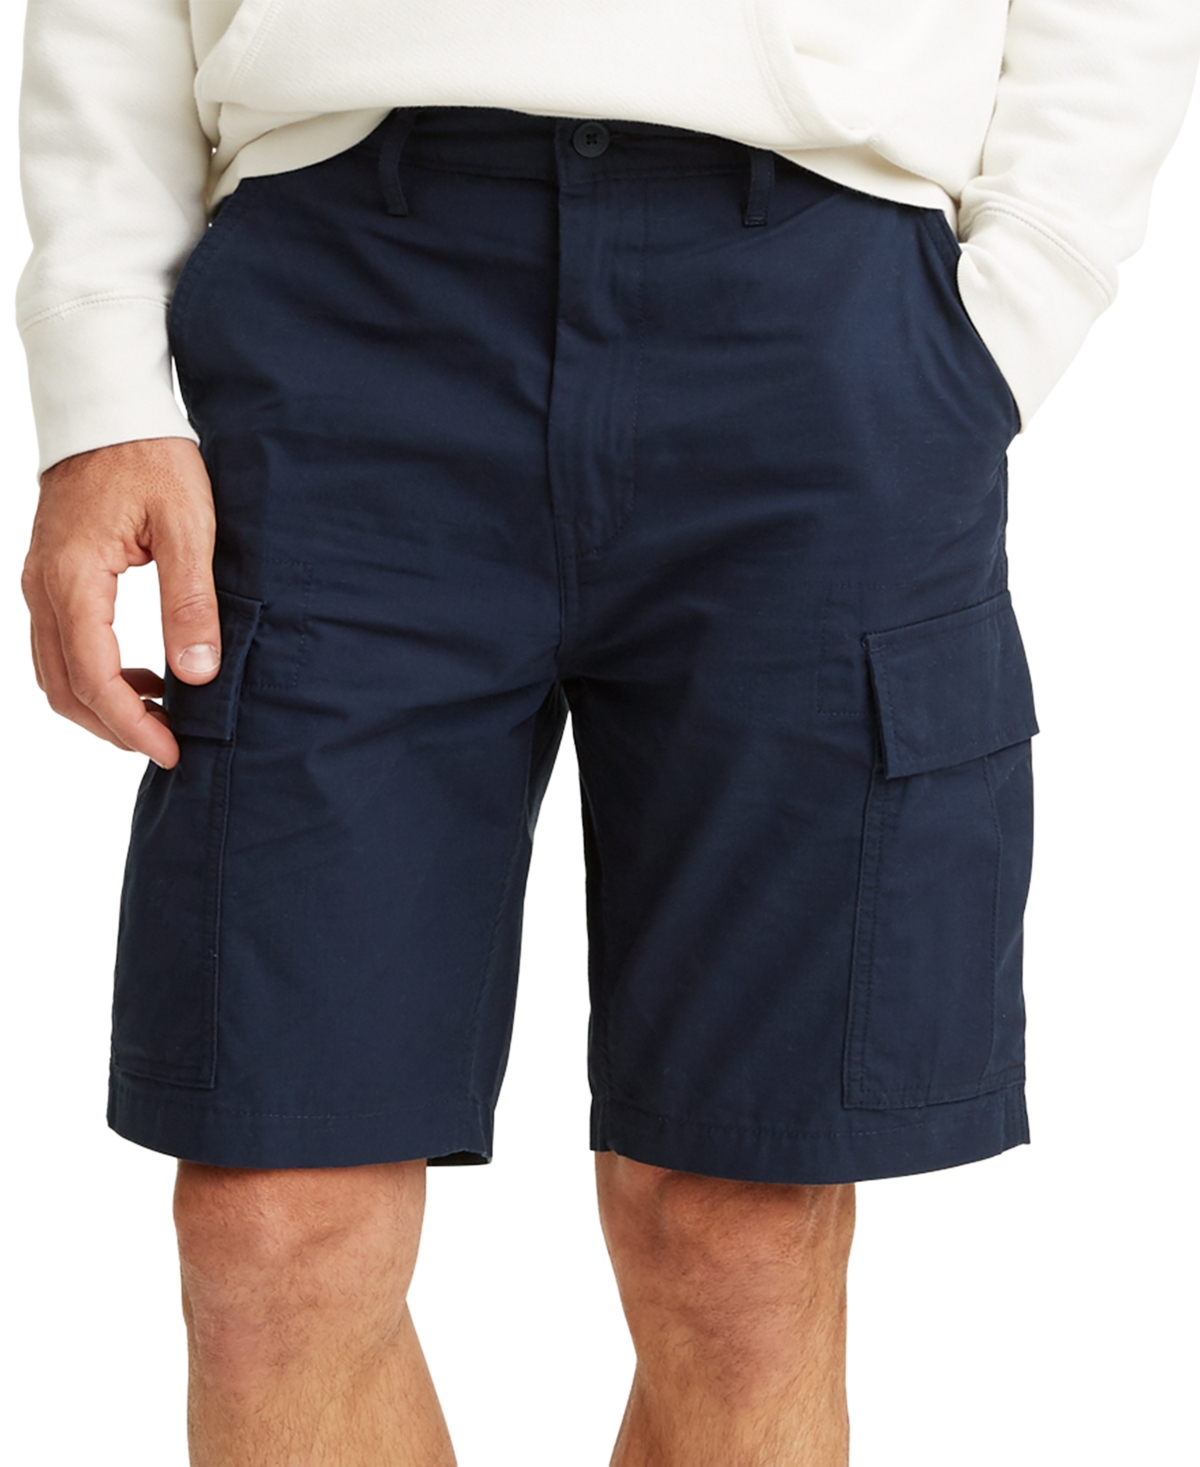 UPC 194328041873 product image for Levi's Men's Big and Tall Loose Fit Carrier Cargo Shorts | upcitemdb.com